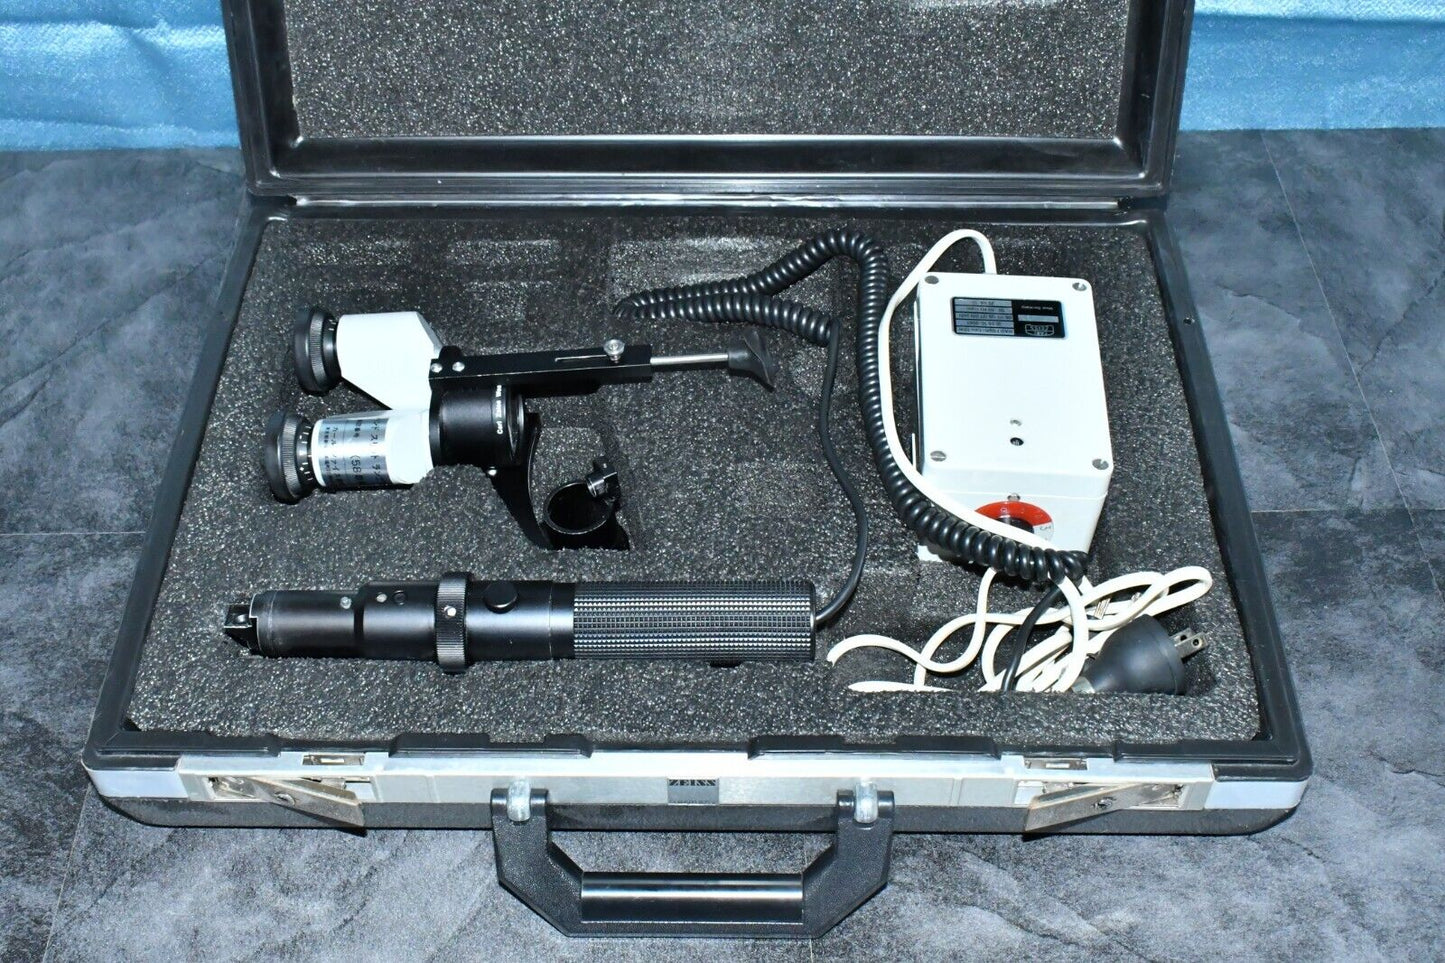 Zeiss HSO-10 portable slit-lamp with carrying case